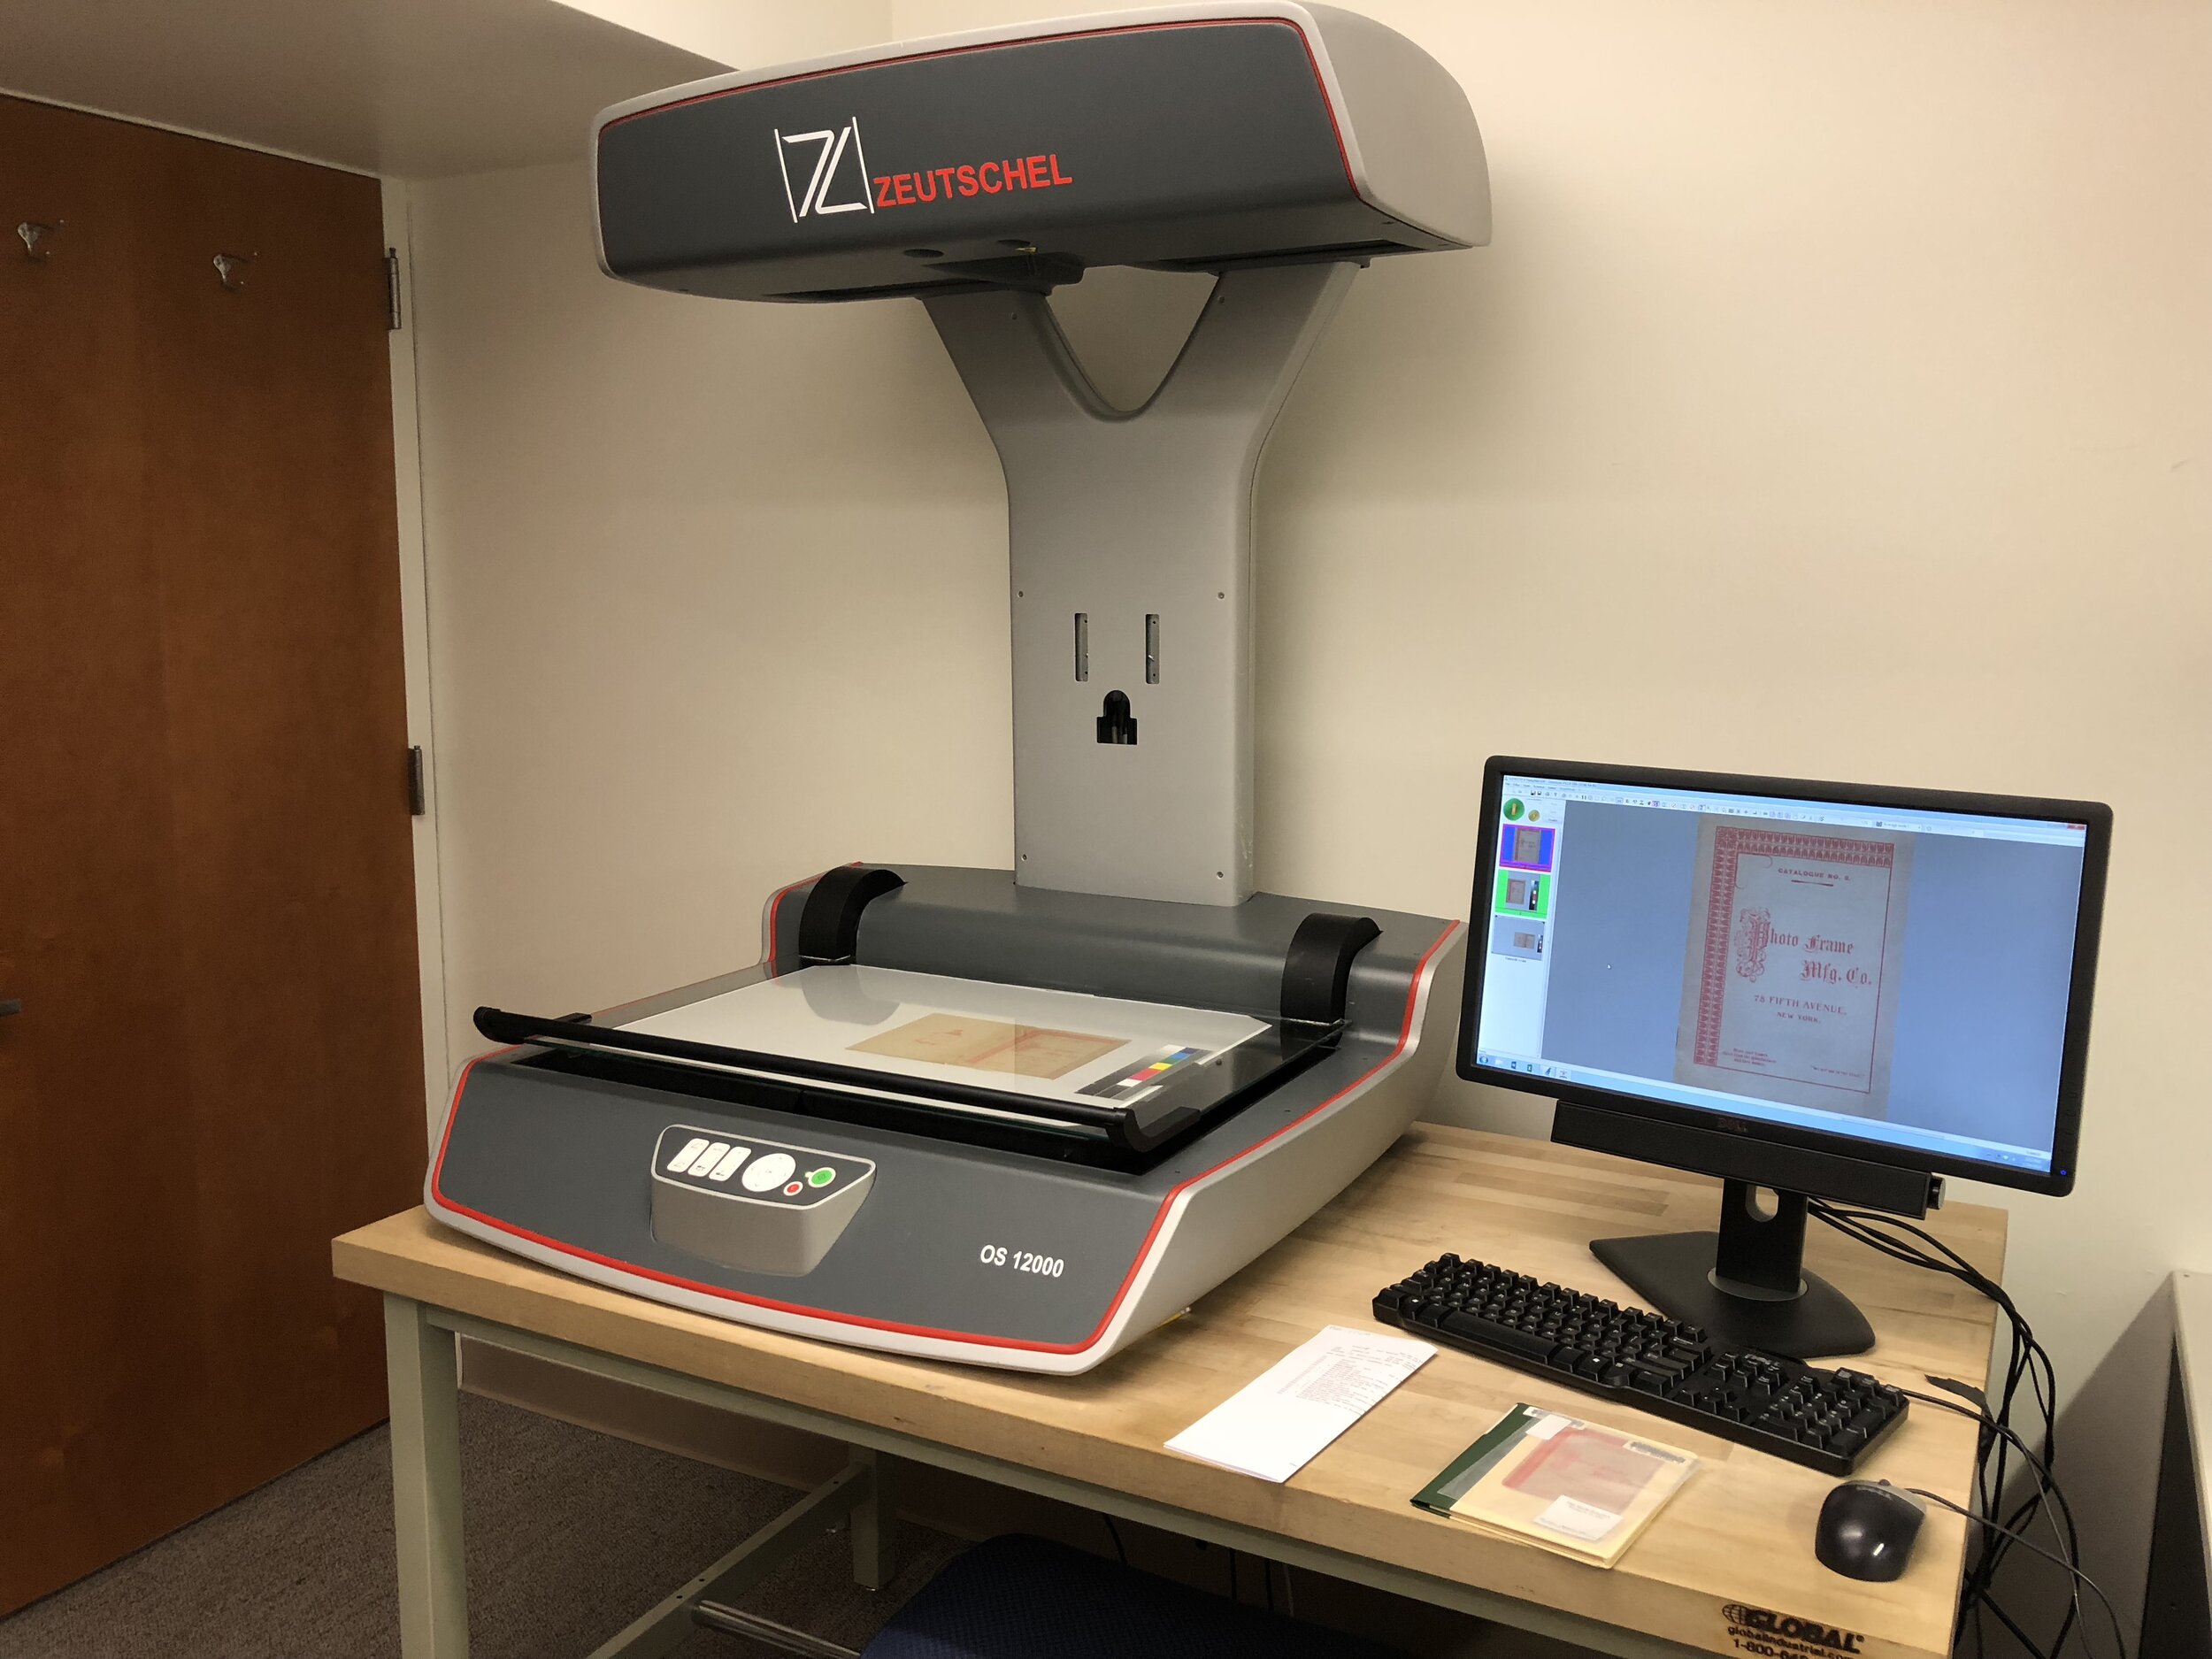   A Zeutschel OS 12000 scanner used for digitizing books and other collection materials in the Thomas J. Watson Library. Here, a custom "Pamphlet" setting is being used when digitizing     Photo Frame Mfg. Co.     (New York: Photo Frame Mfg. Co., ca.